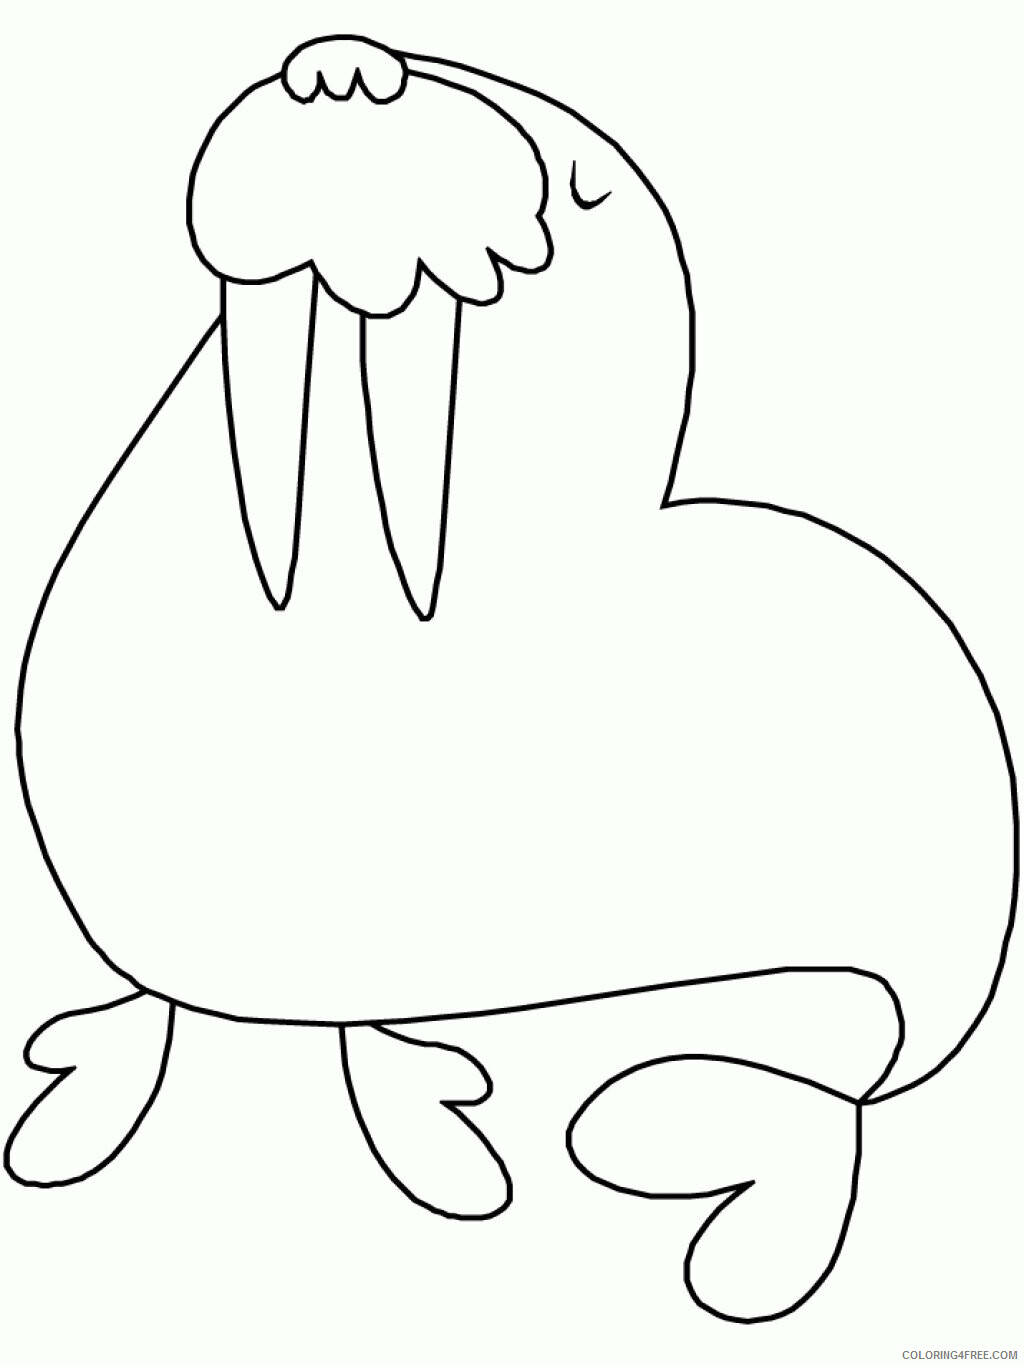 Walrus Coloring Pages Animal Printable Sheets Walrus To Print 2021 4964 Coloring4free